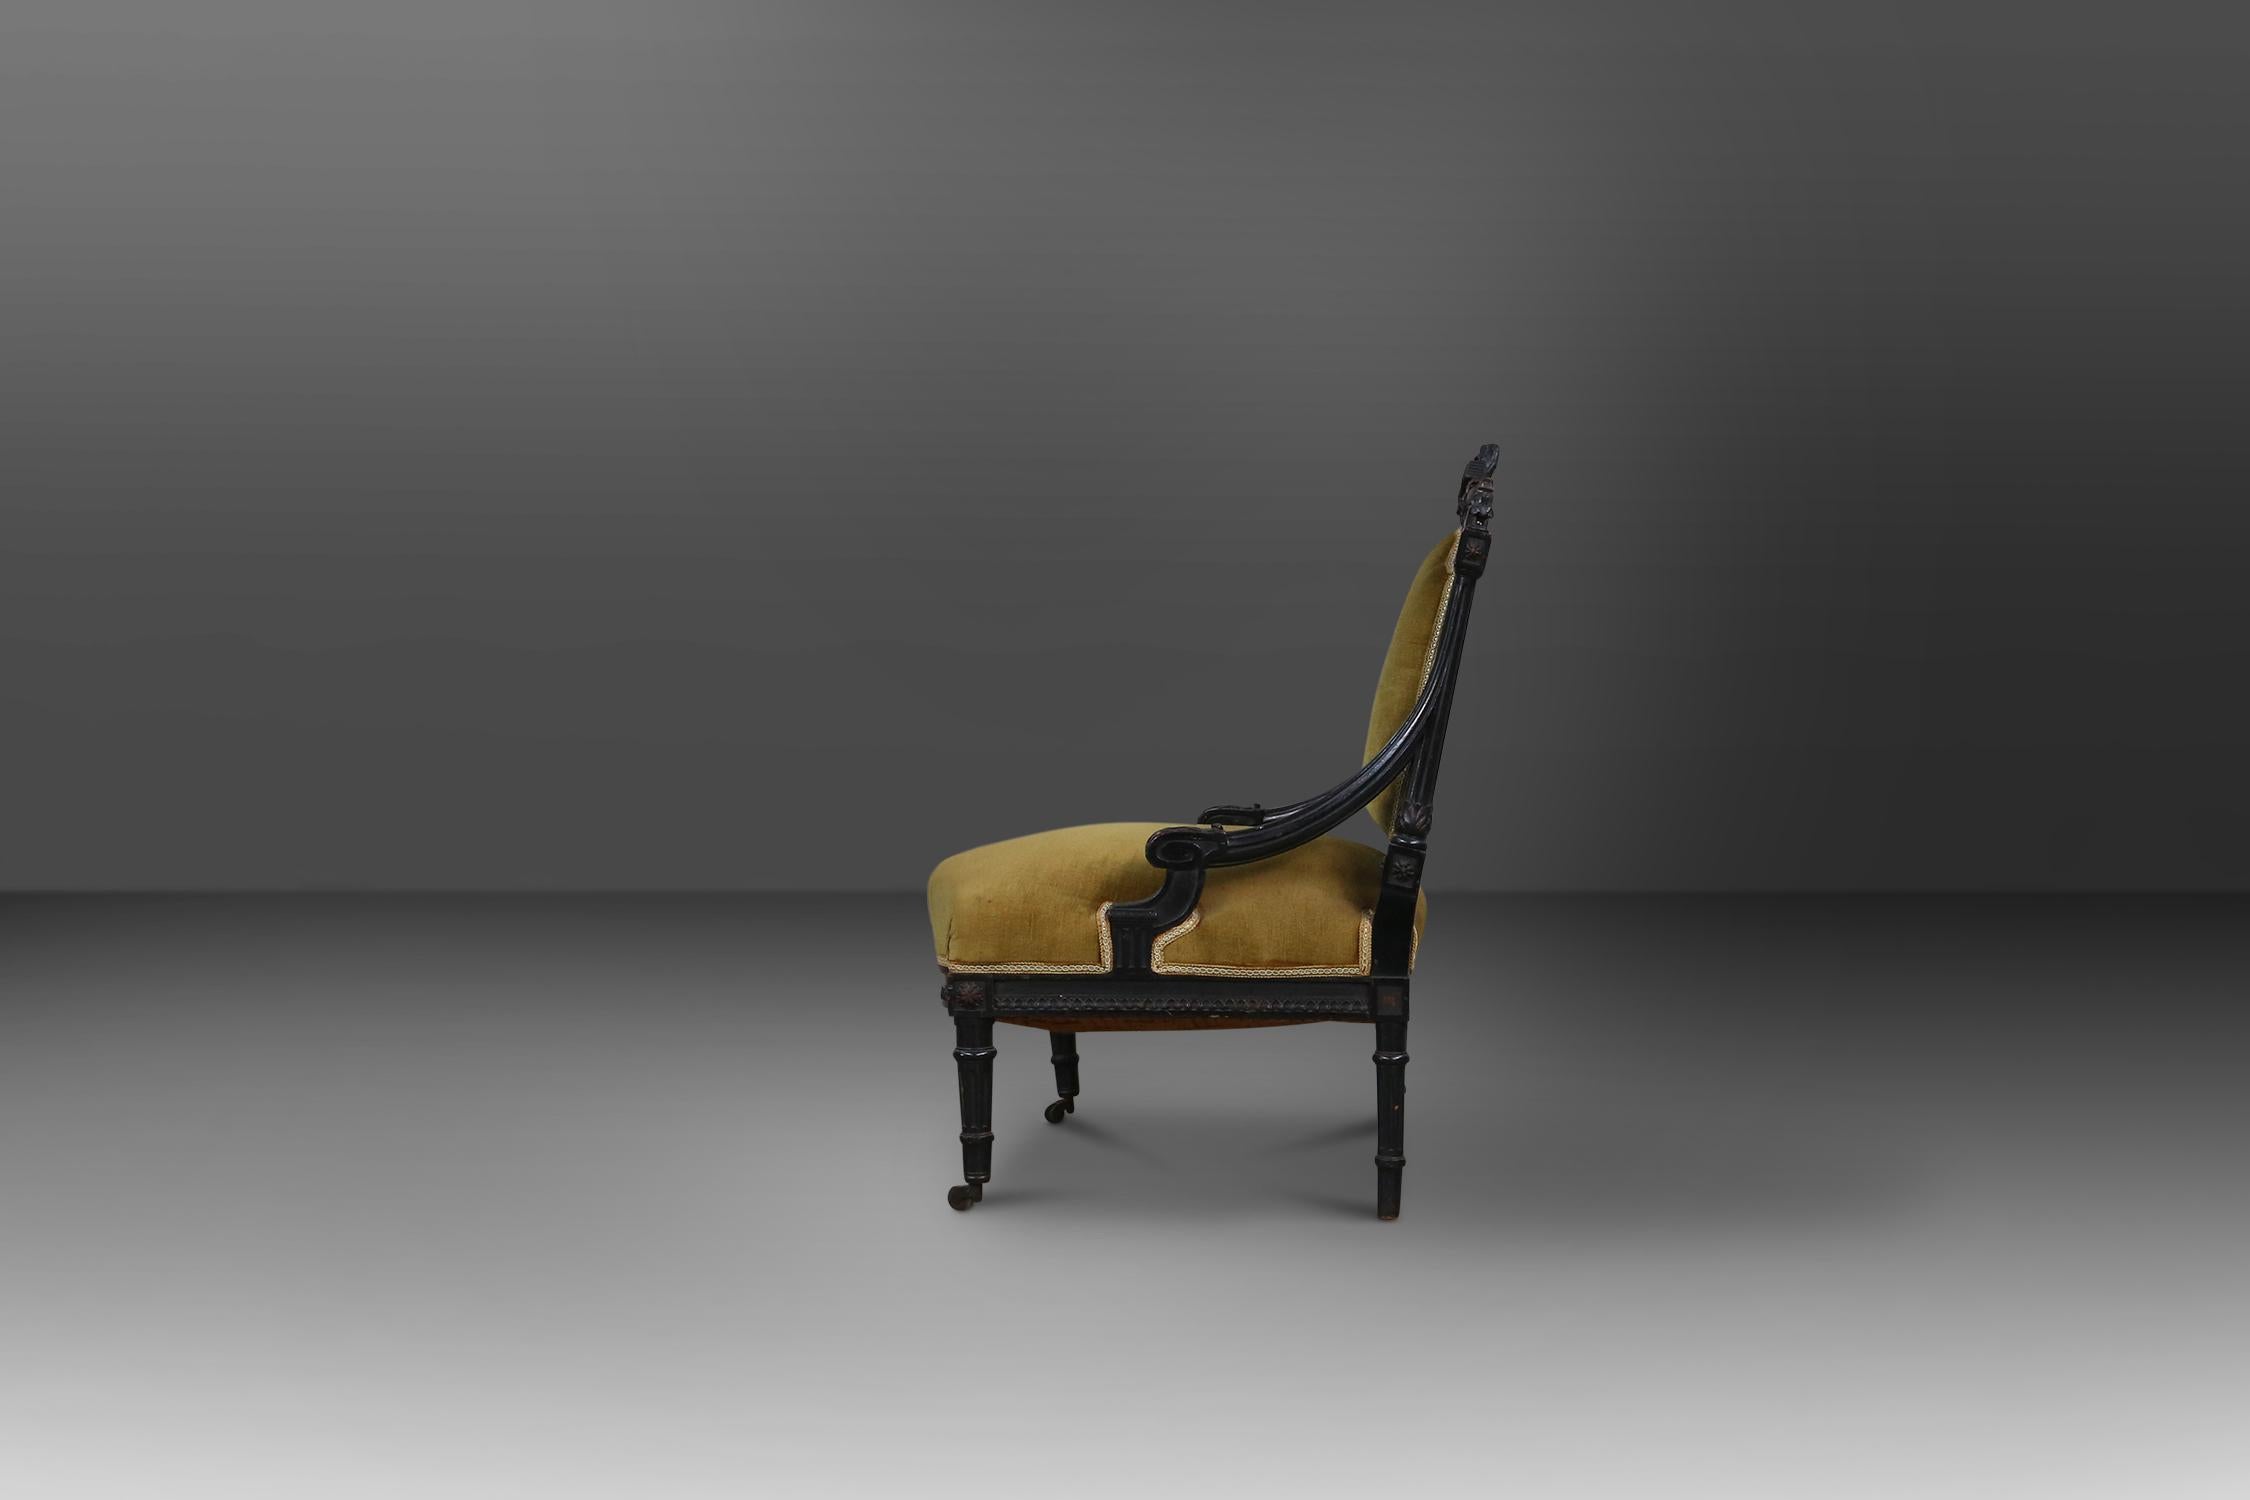 Empire style armchair made around 1850 in black wood and green-yellow velvet.
Has some nice sculptural details carved in the wood. Is easy to move on the front wheels.